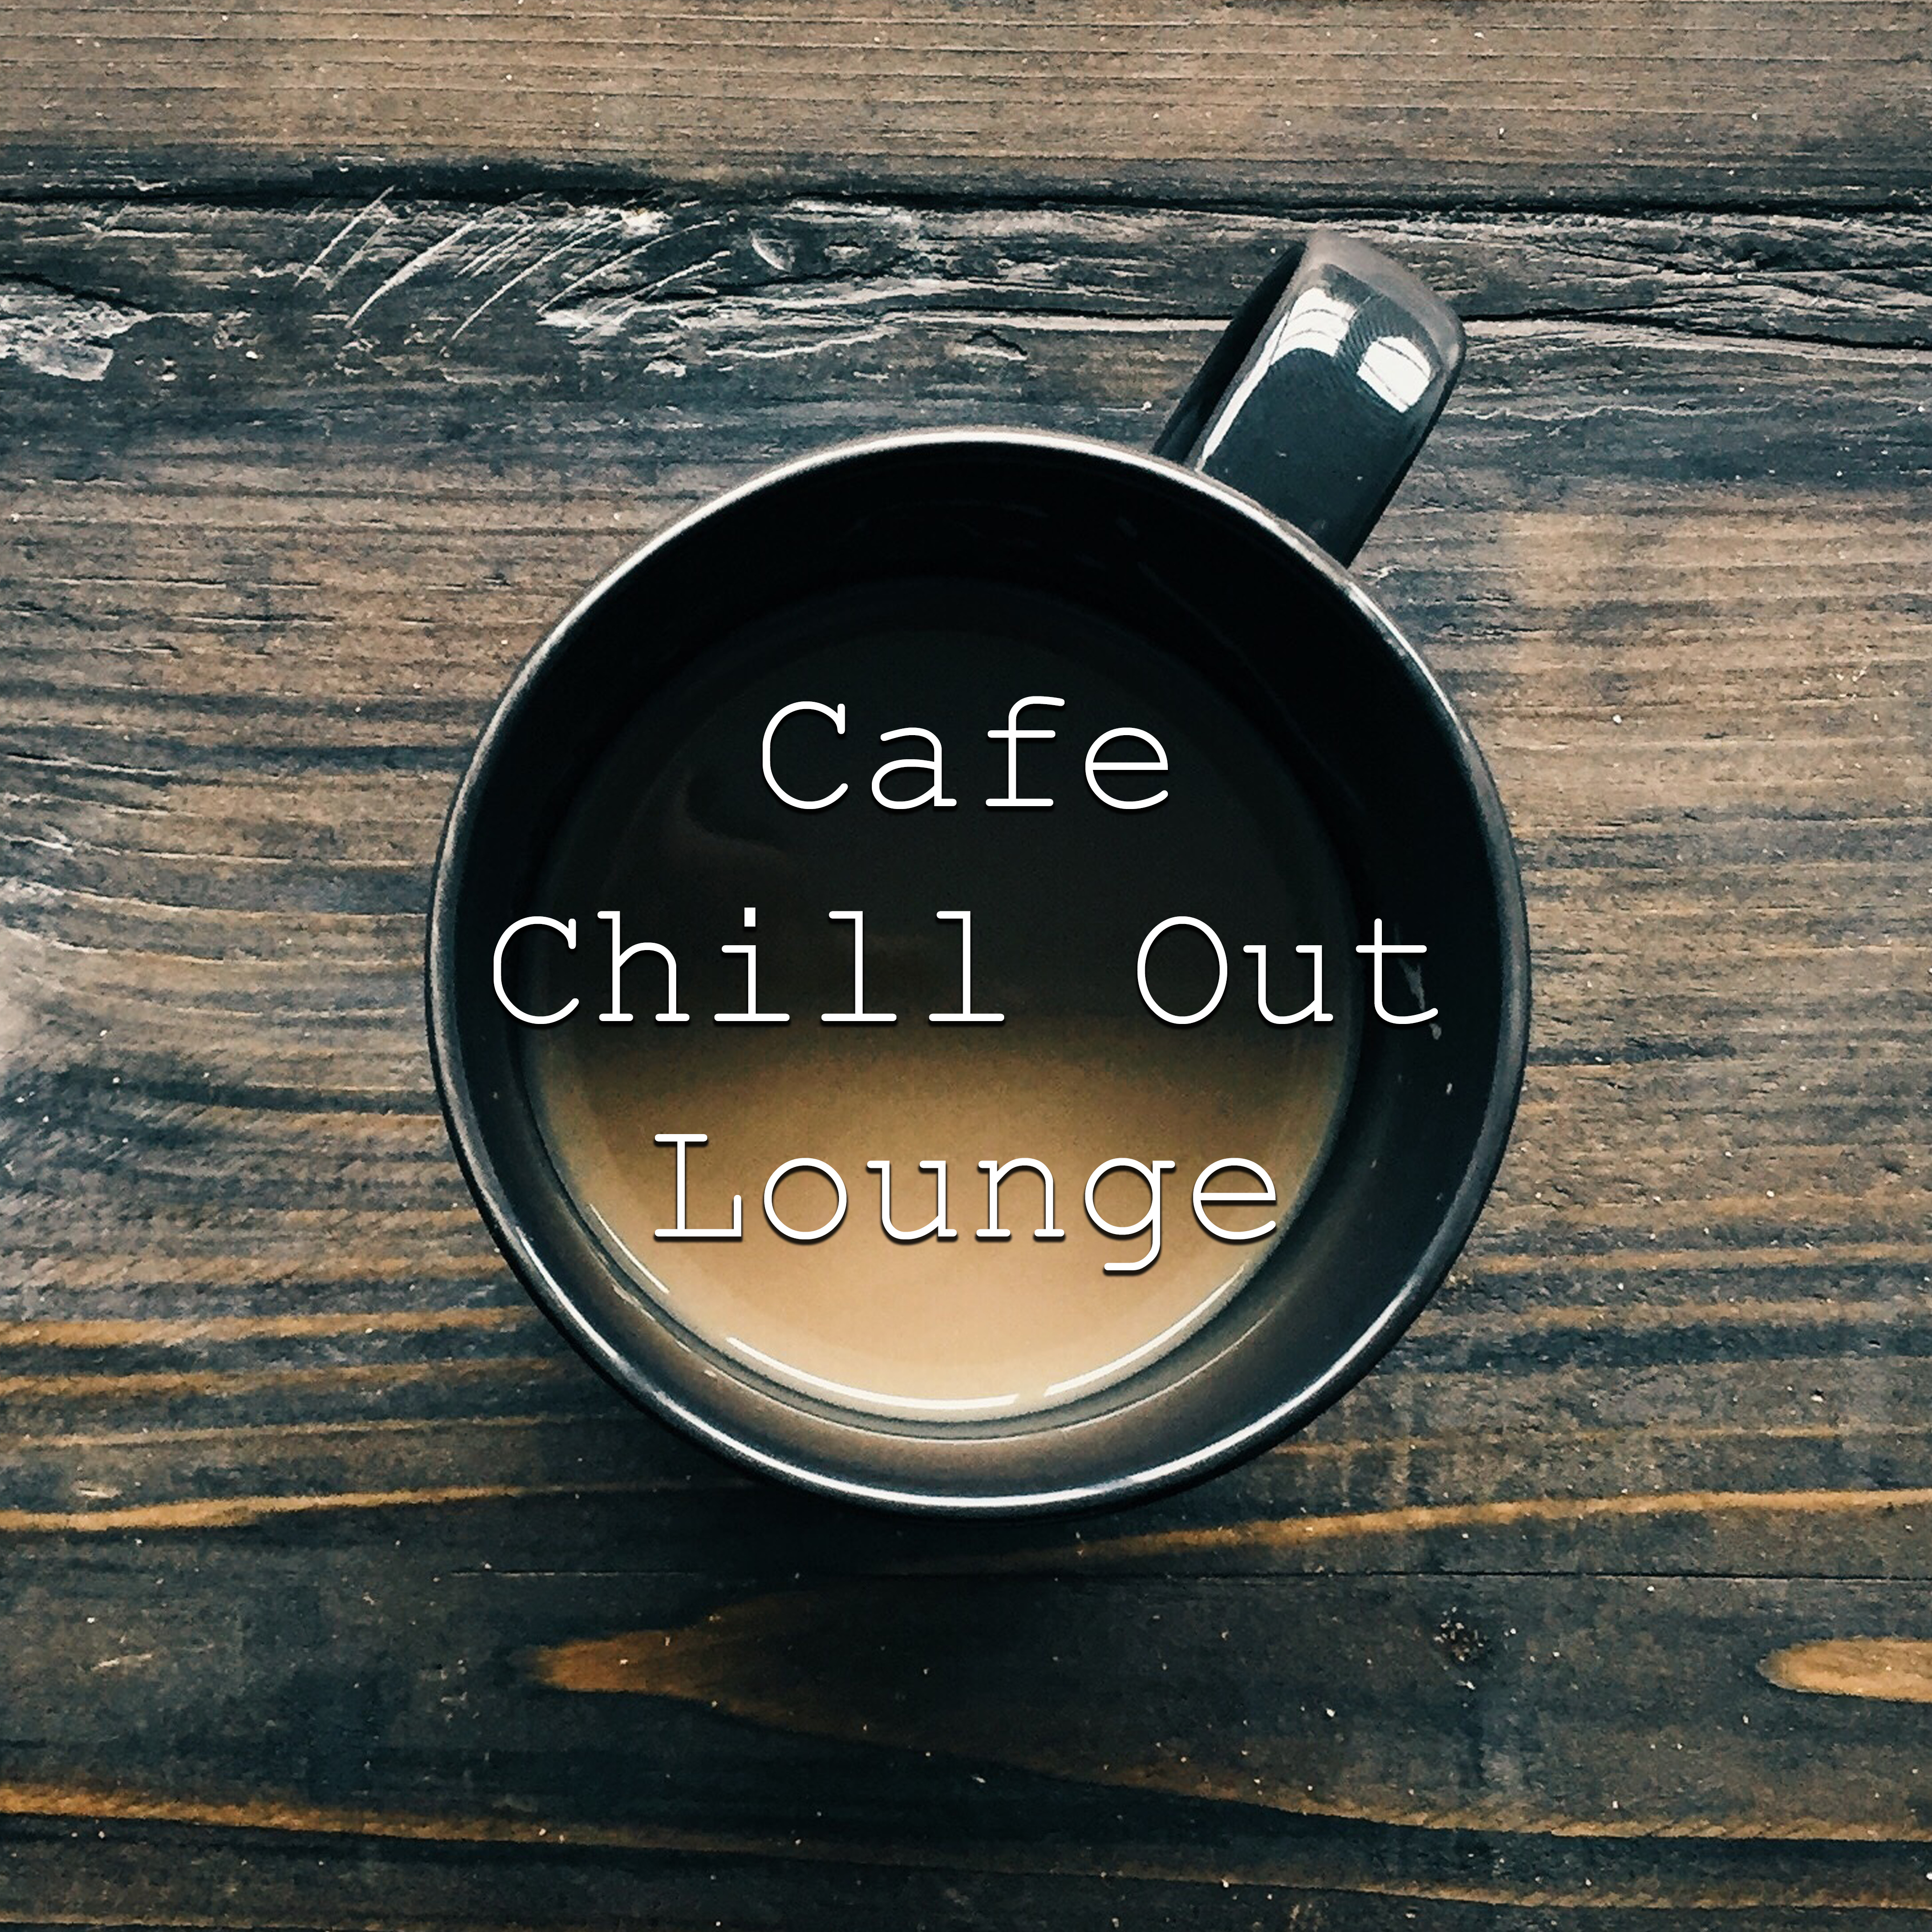 Cafe Chill Out Lounge  Relaxing Summer Music, Sounds for Afternoon Coffee, Rest  Relax